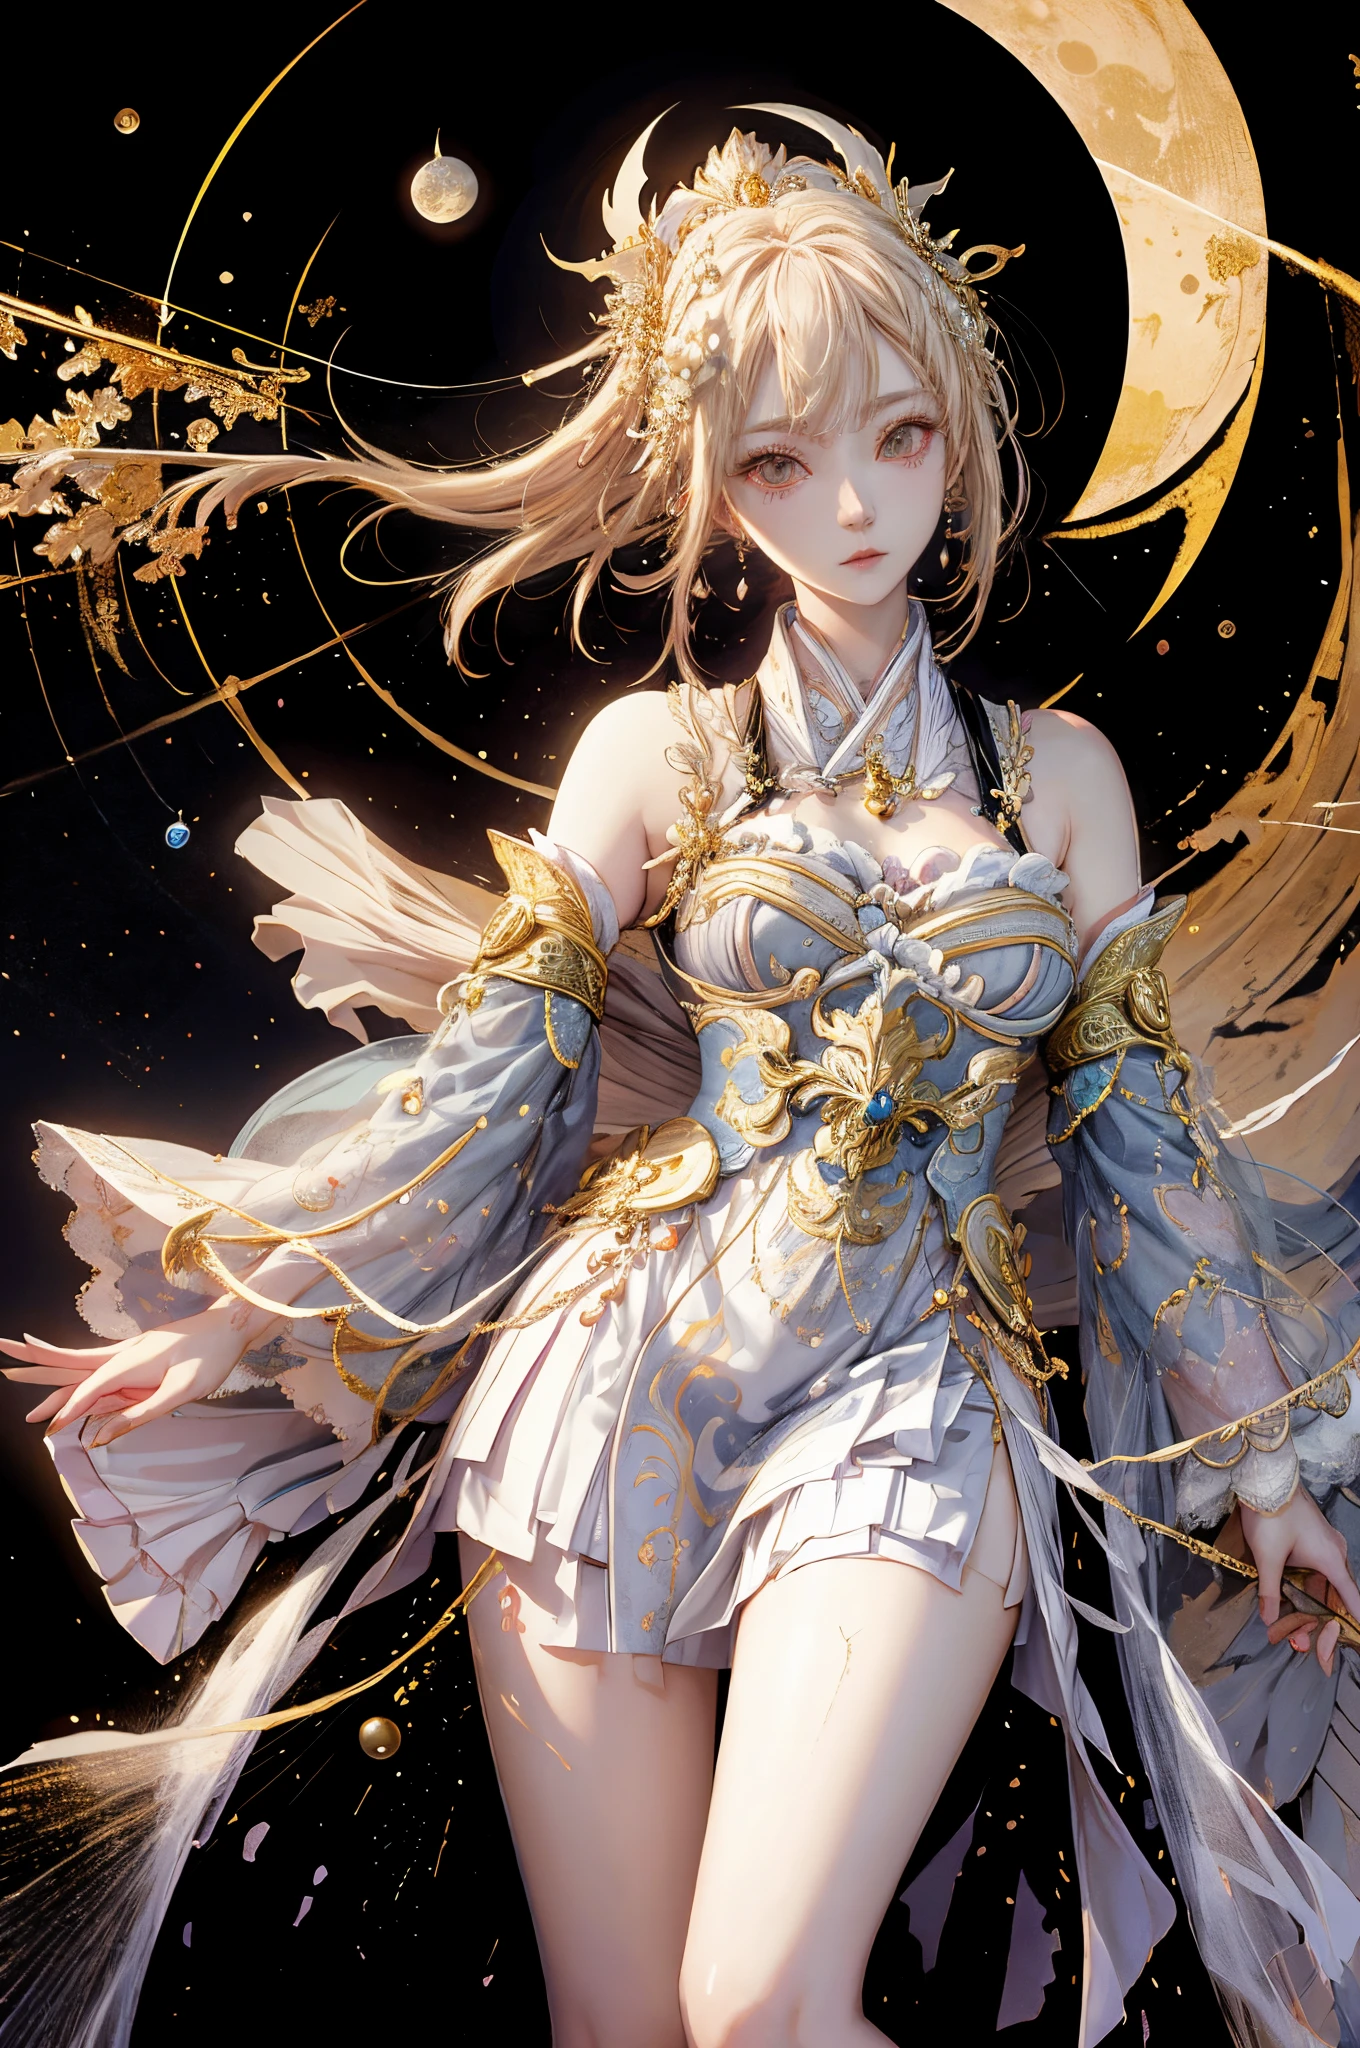 Anime girl with short blond hair and gold jewelry in front of black background, onmyoji detailed art, anime goddess, portrait onmyoji, Onmyoji, white haired god, the goddess artemis smirking, goddess of the moon, intricate gorgeous anime CGI style, Beautiful fantasy empress, Works of the Goddess of Sorrow, goddess of the moon, goddess of the moon, Colossal 